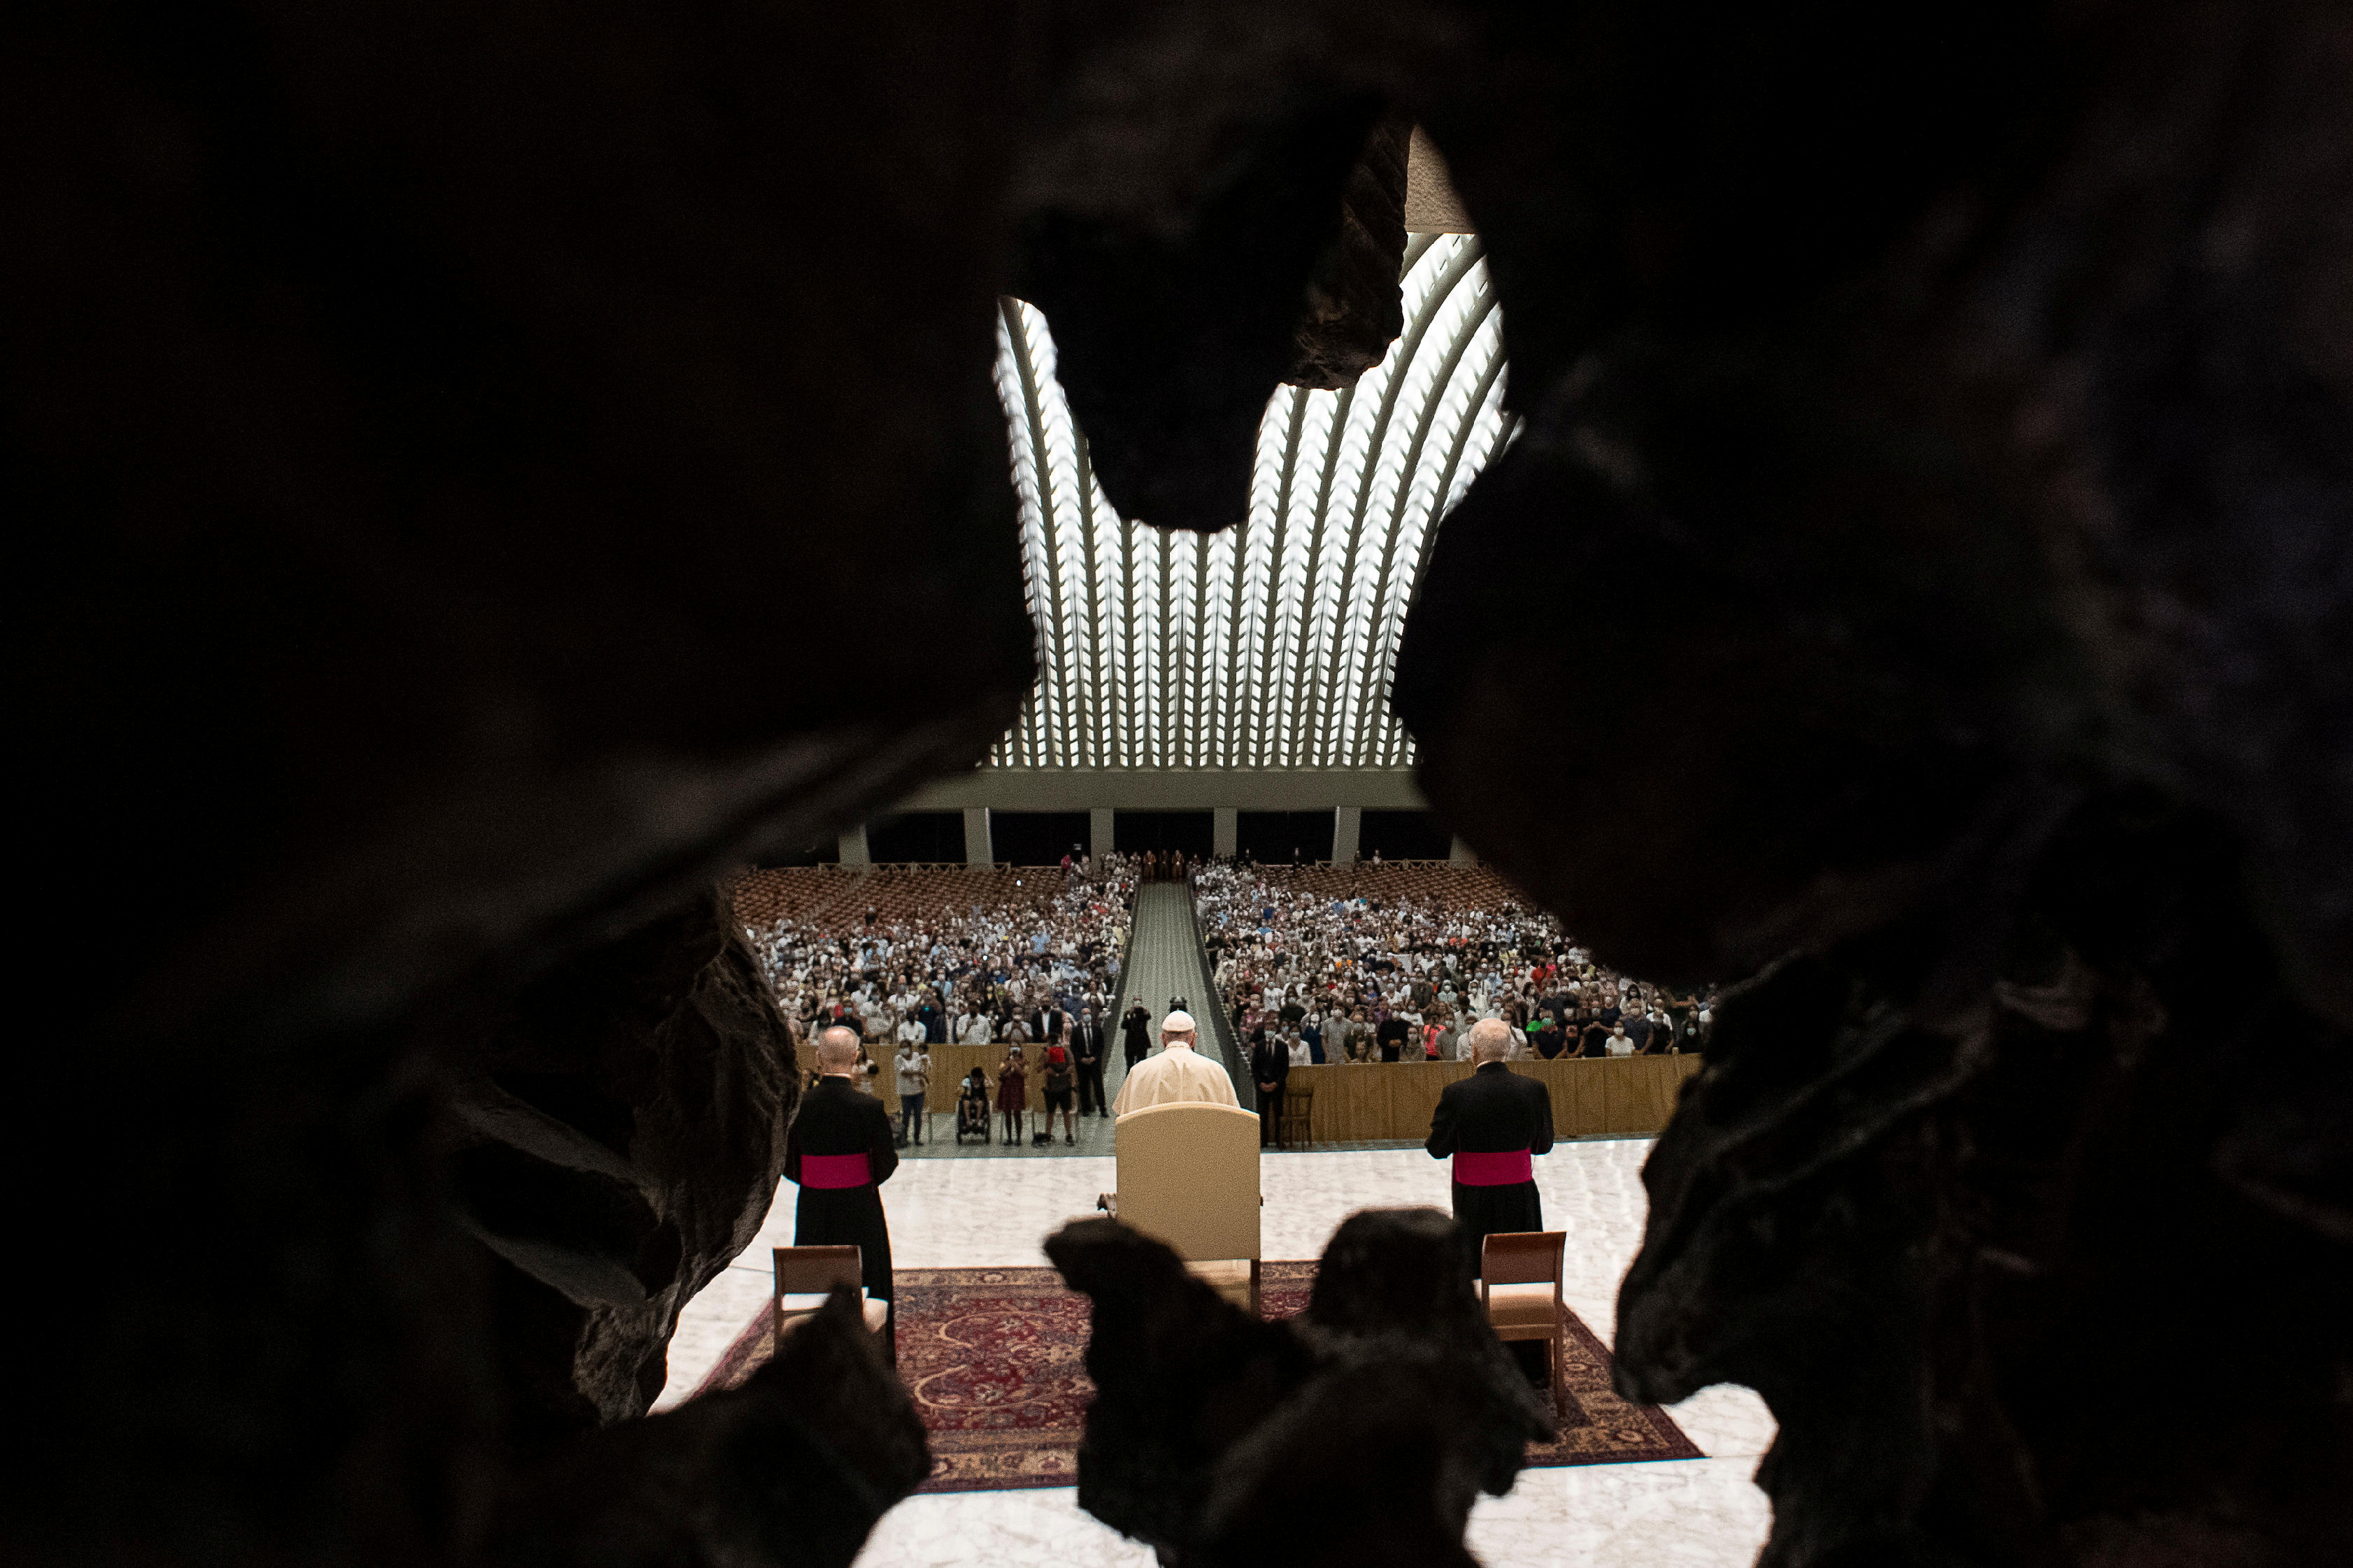 Pope Francis holds weekly audience at the Vatican